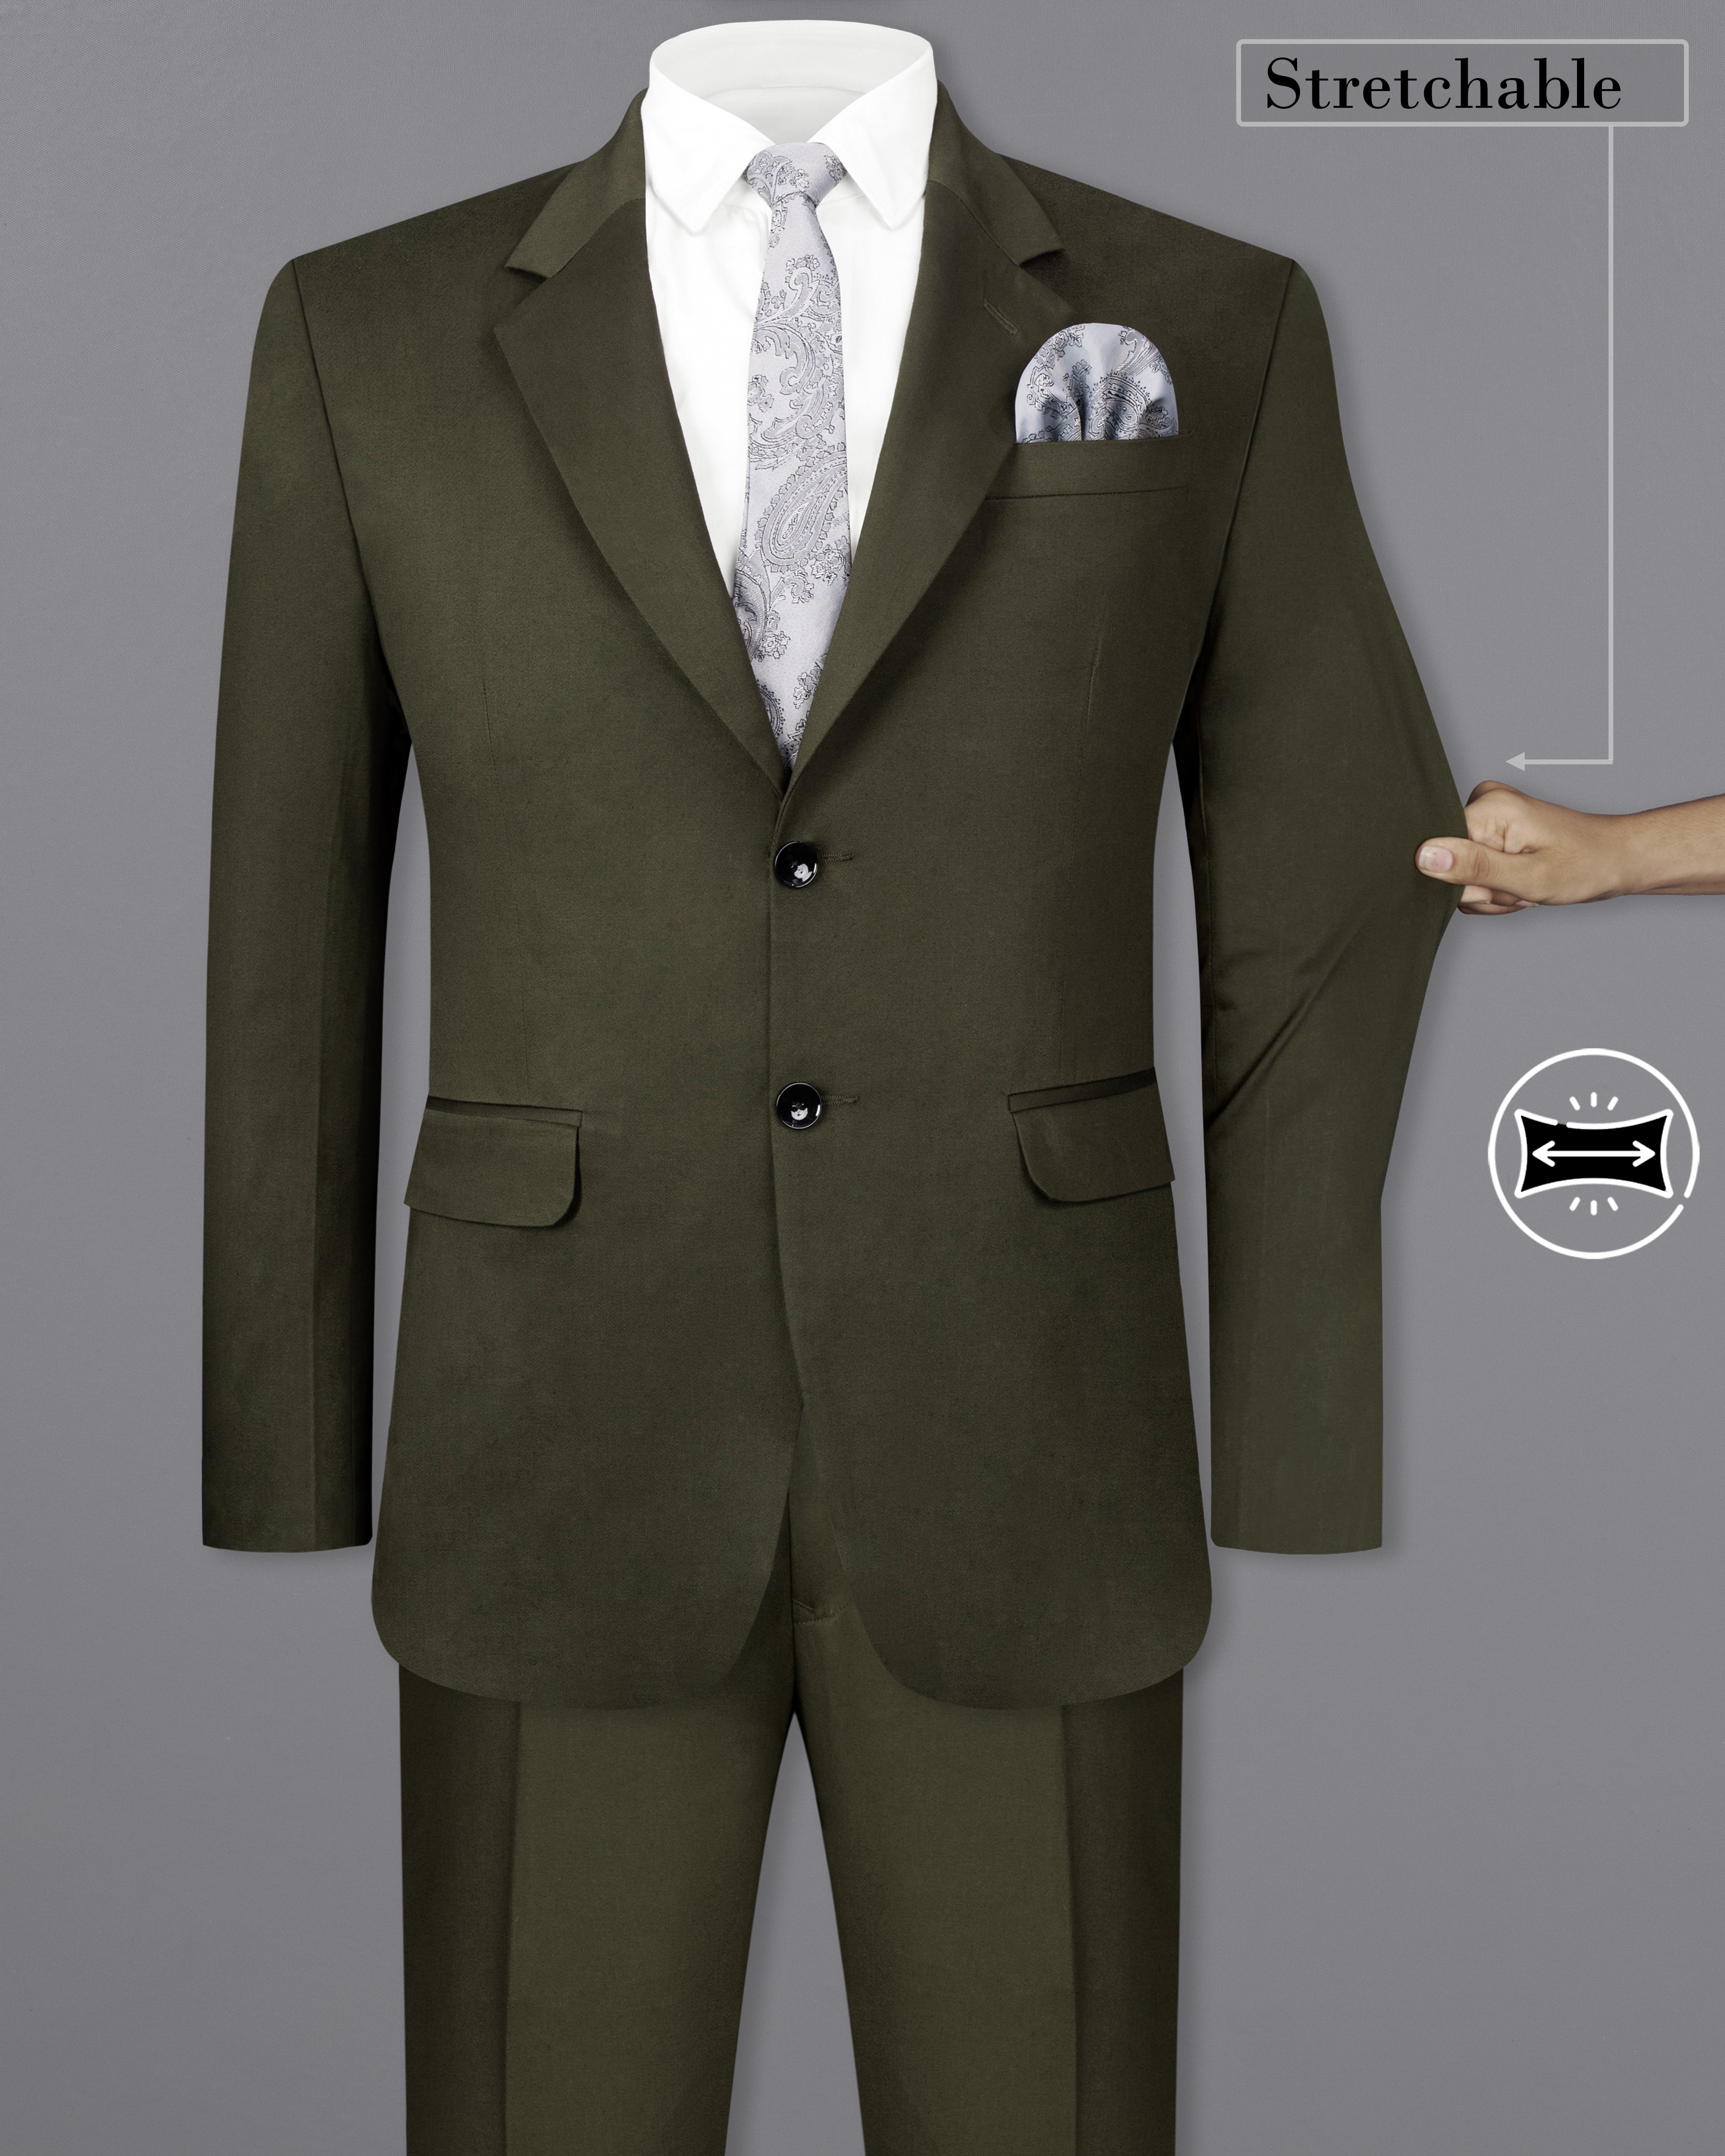 Taupe Green Solid Stretchable Premium Cotton traveler Suit ST2642-SB-36,ST2642-SB-38,ST2642-SB-40,ST2642-SB-42,ST2642-SB-44,ST2642-SB-46,ST2642-SB-48,ST2642-SB-50,ST2642-SB-52,ST2642-SB-54,ST2642-SB-56,ST2642-SB-58,ST2642-SB-60